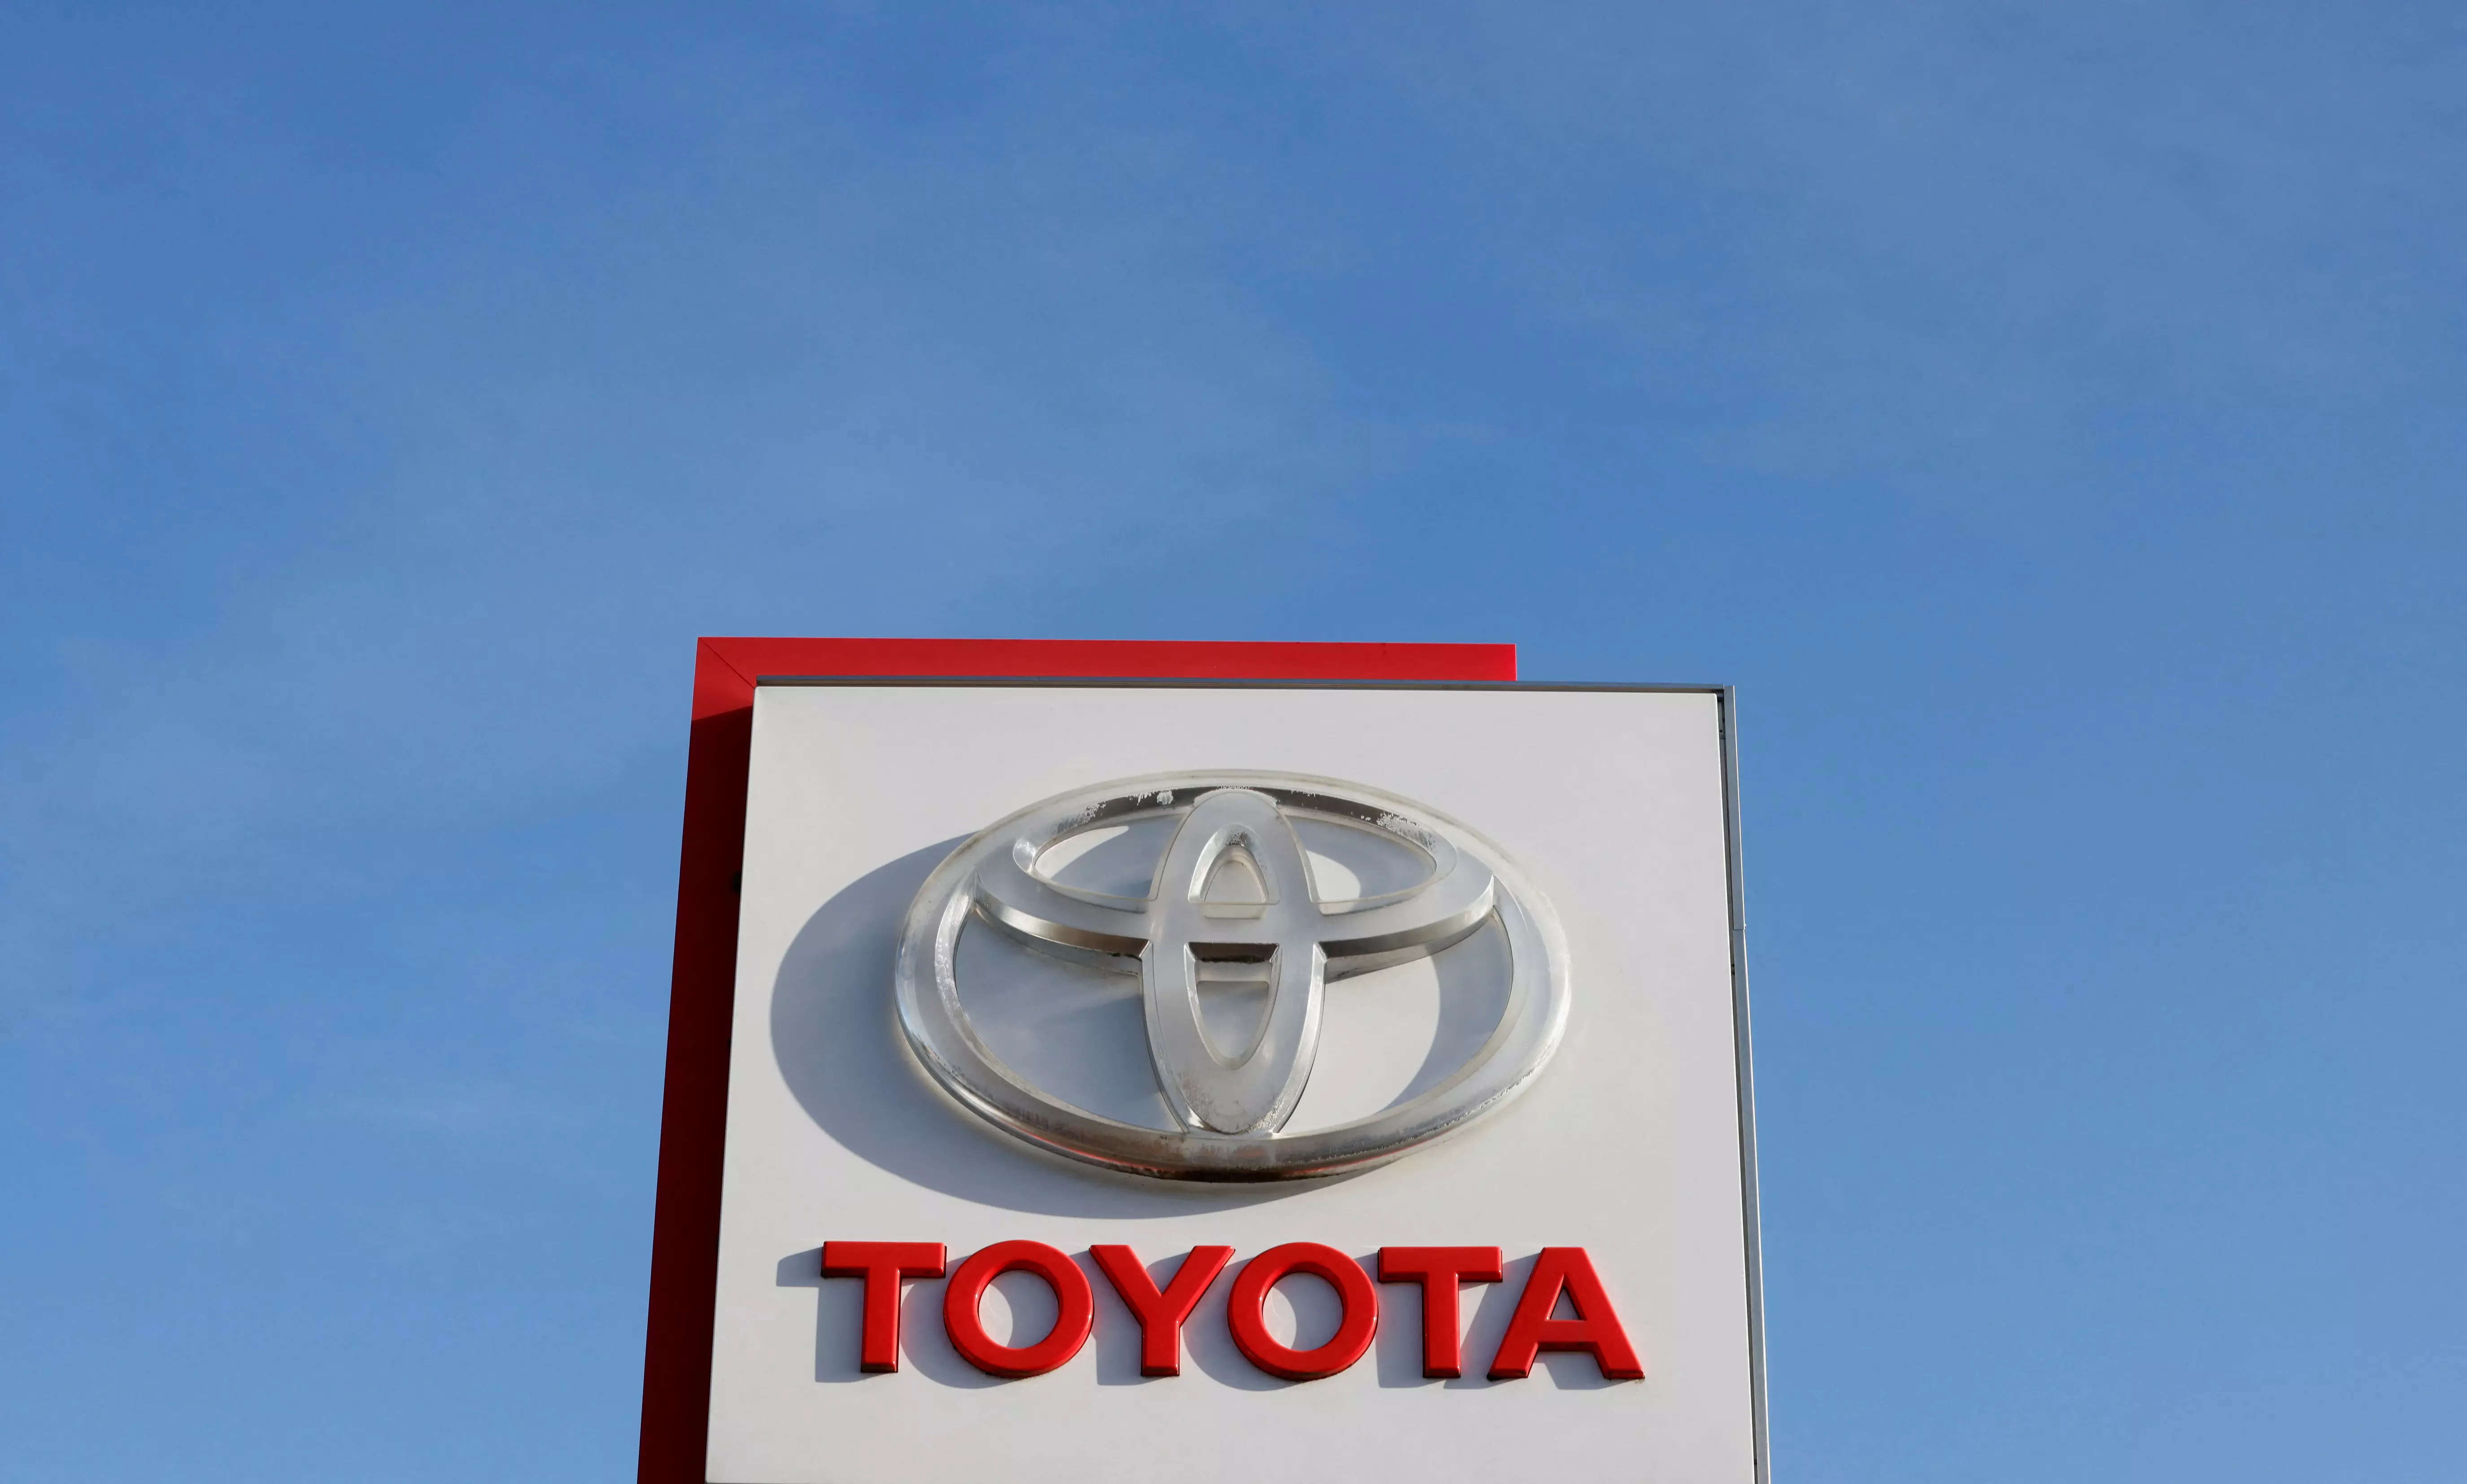 <p><br>"We had to stop production yesterday evening. This will of course have an effect on our production plan. It is not clear how long will the outage last," said Toyota spokesman Tomas Paroubek.</p>